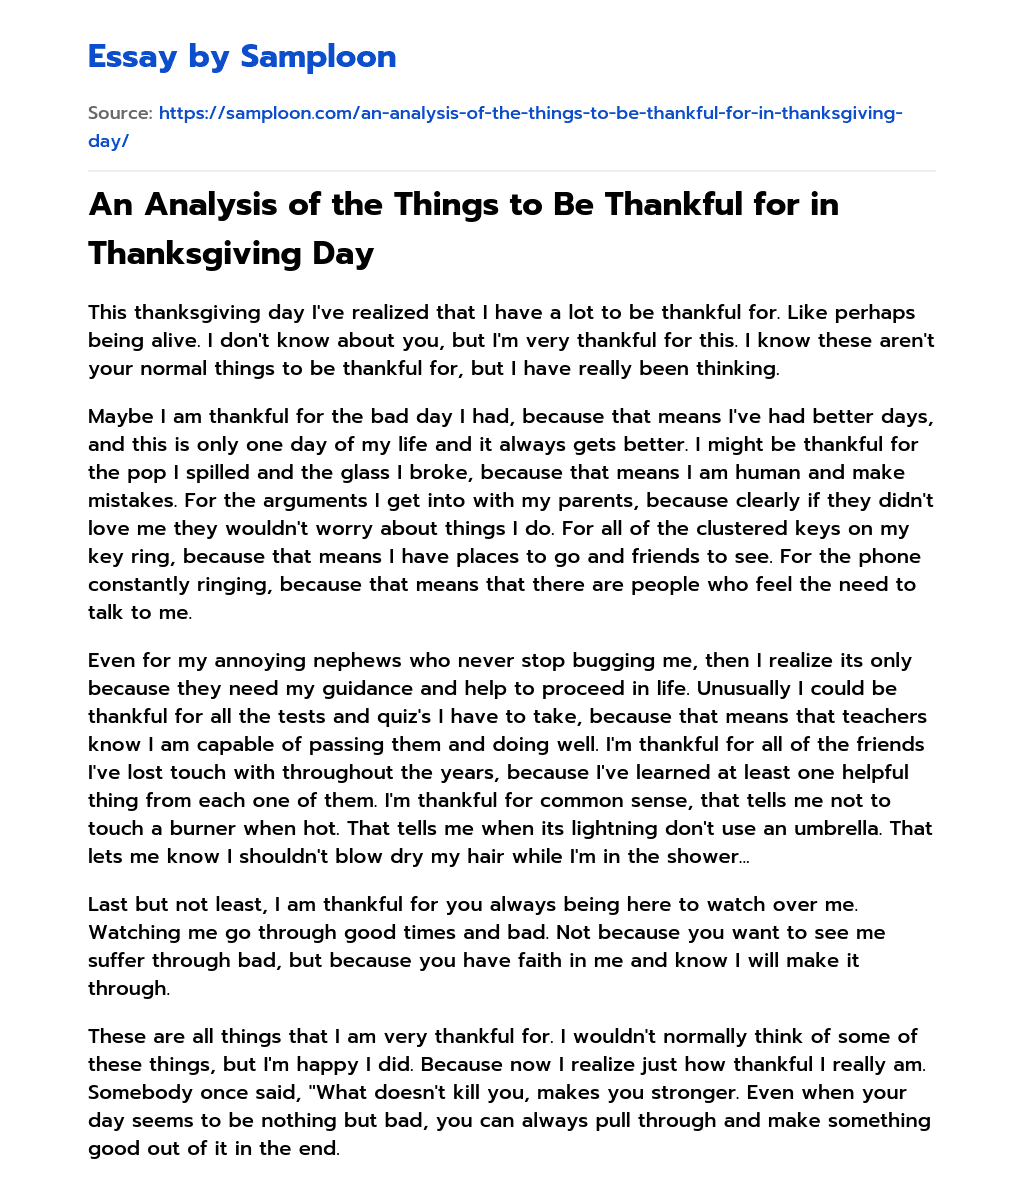 An Analysis of the Things to Be Thankful for in Thanksgiving Day essay